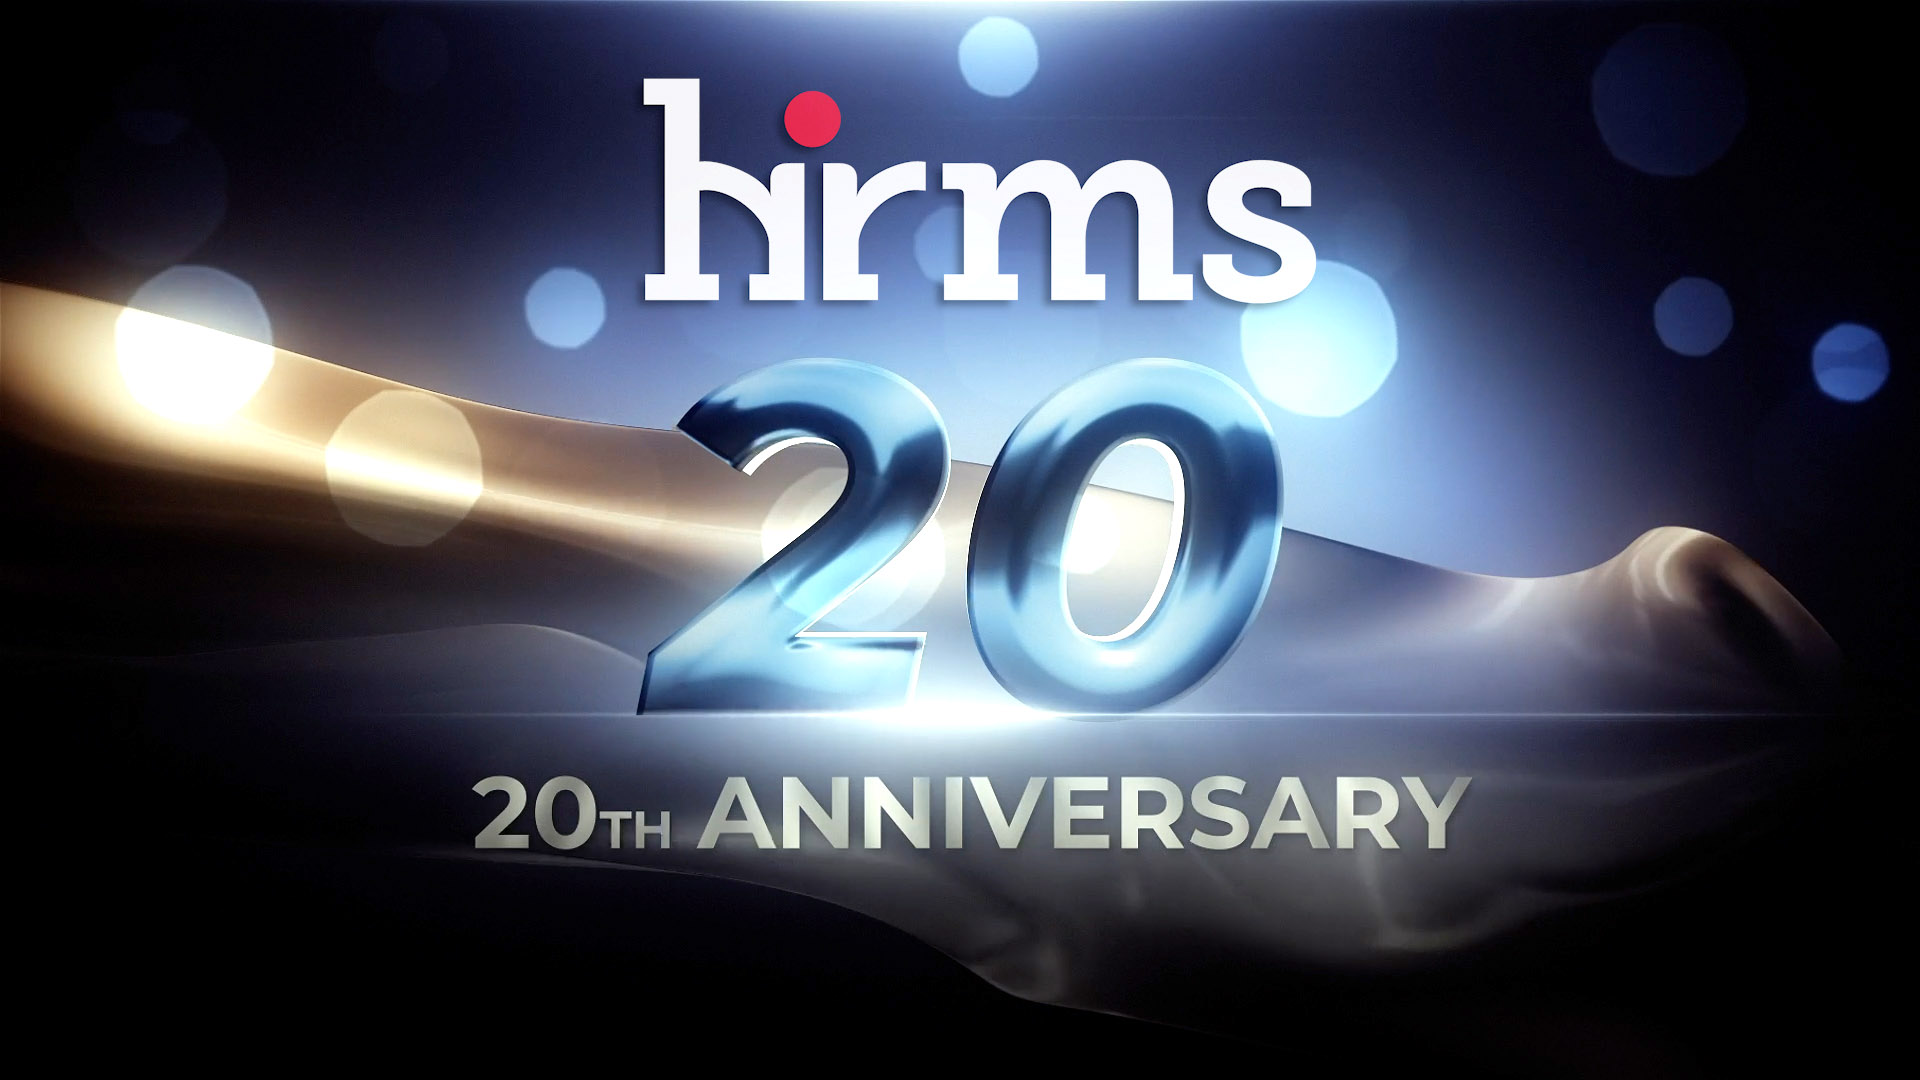 Happy 20th Anniversary HRMS